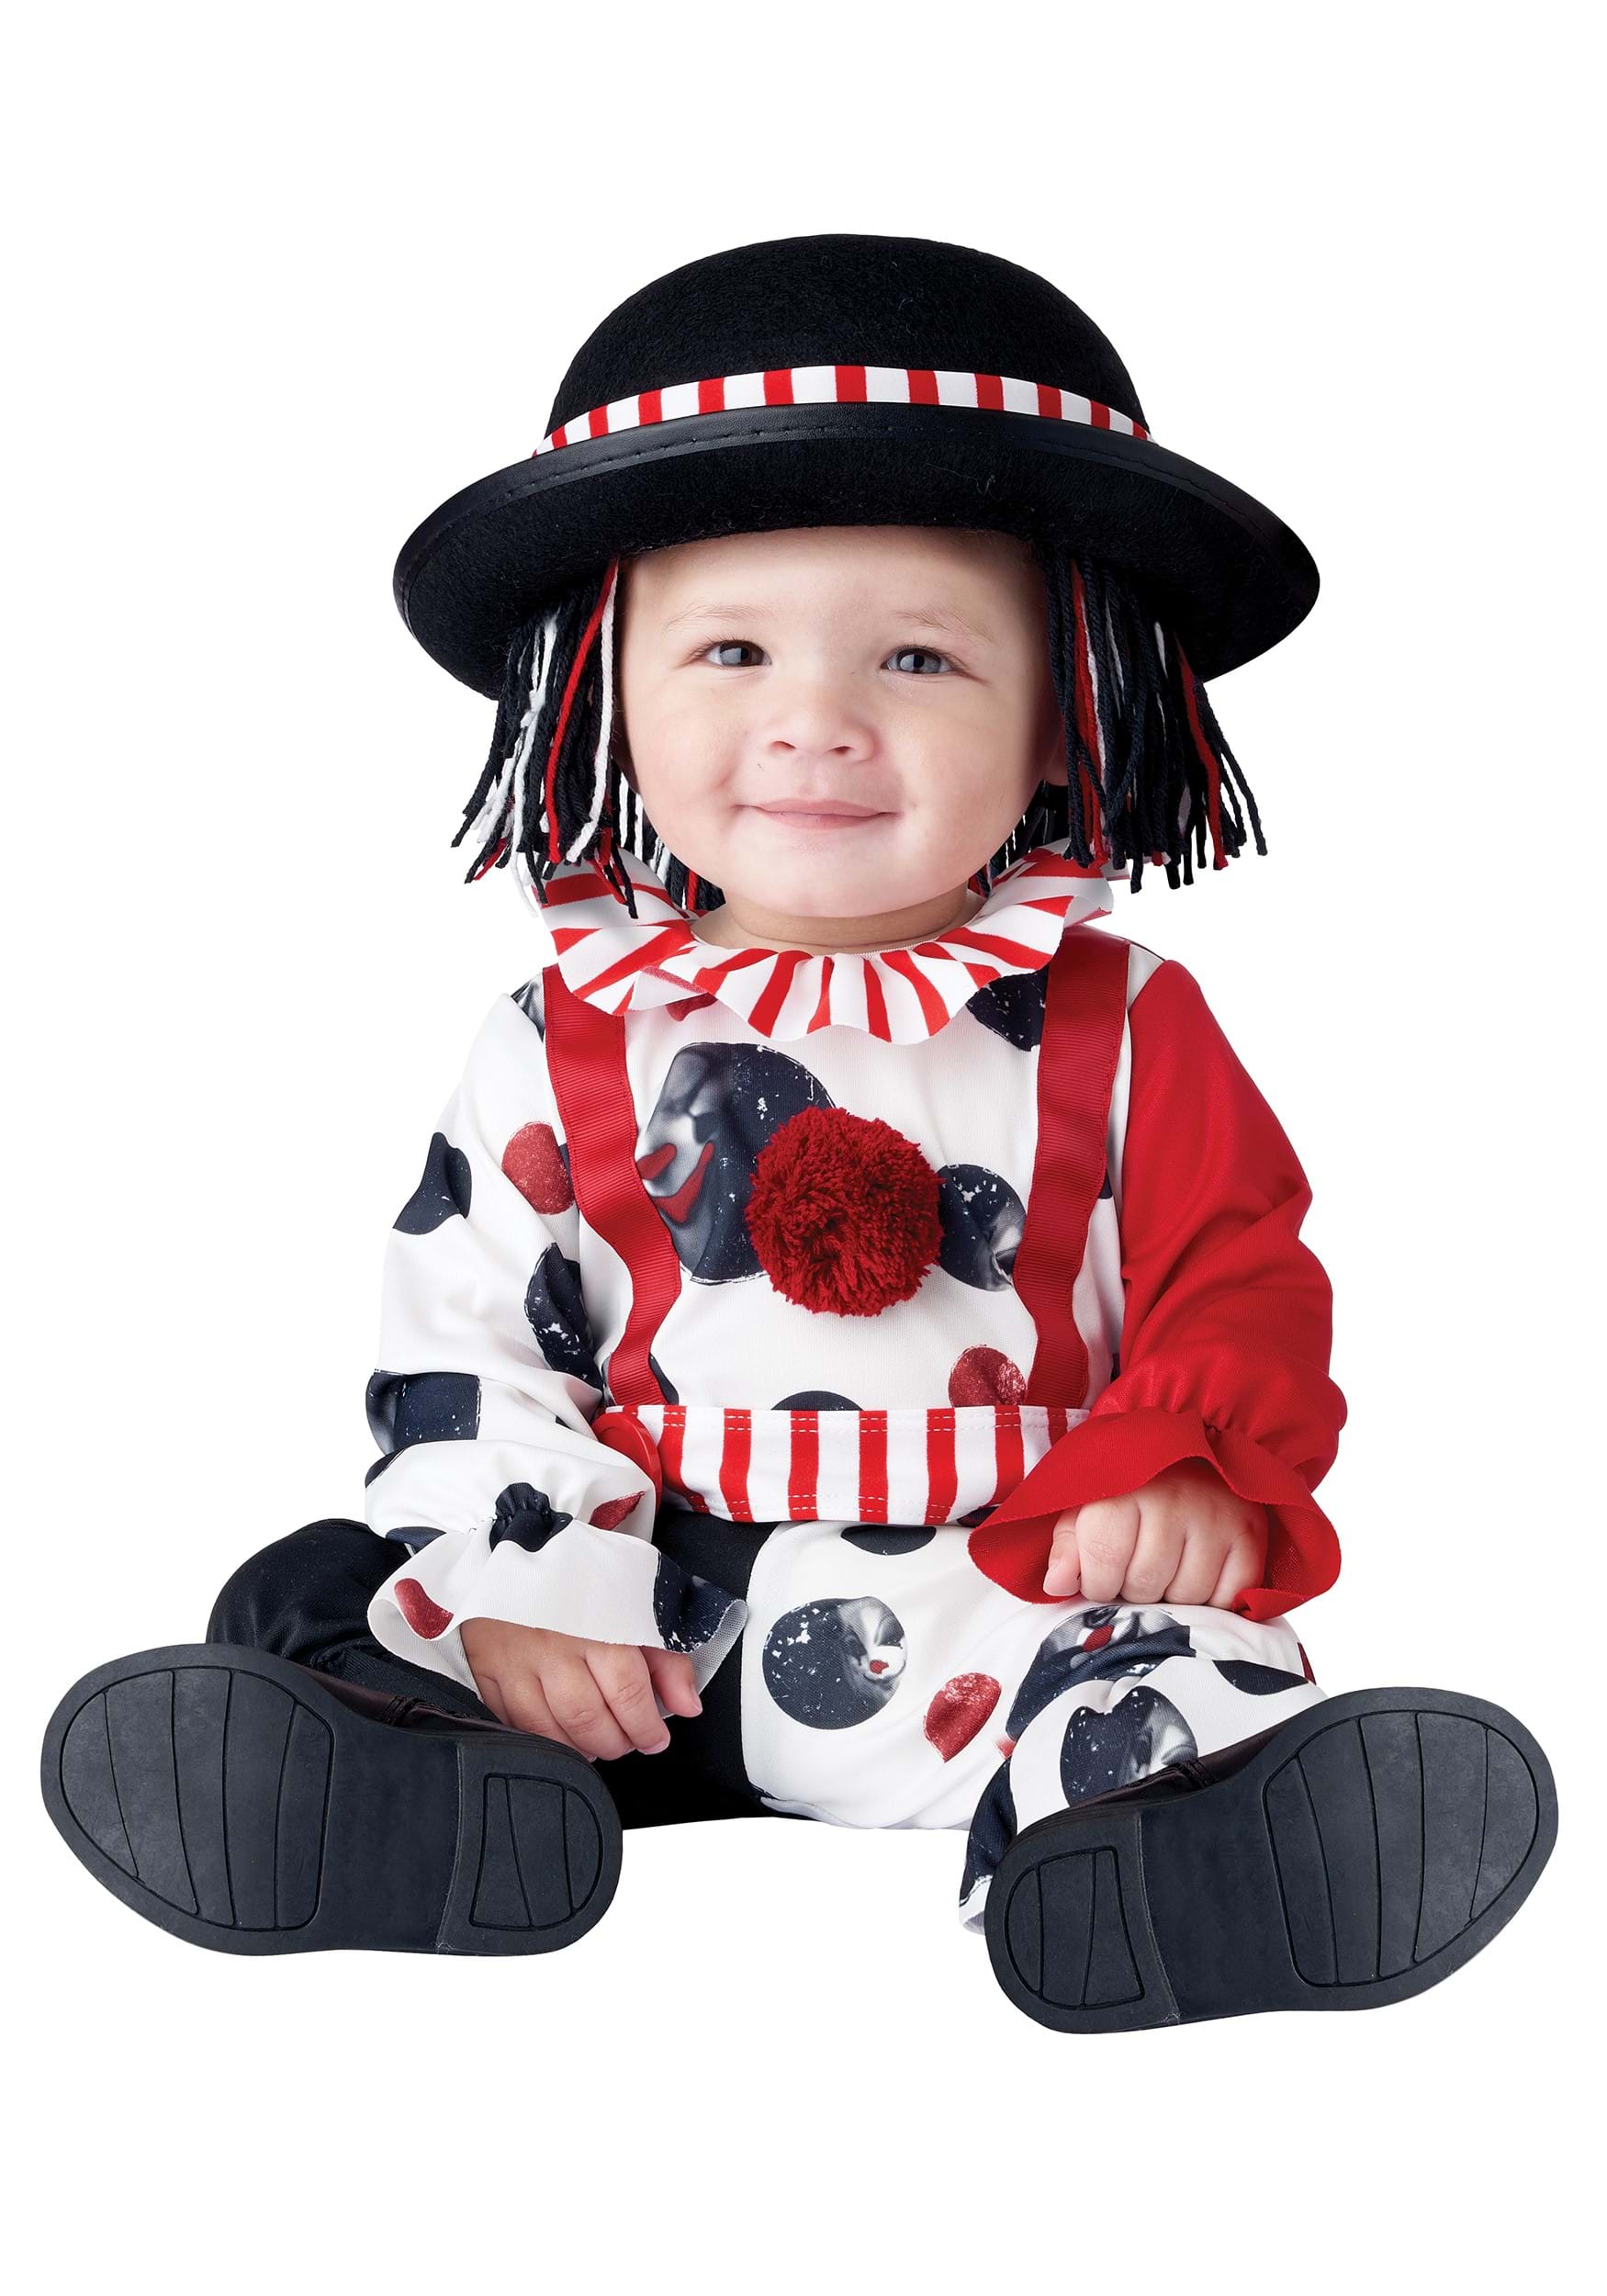 Photos - Fancy Dress California Costume Collection Clowning Around Infant Costume Black/Red 